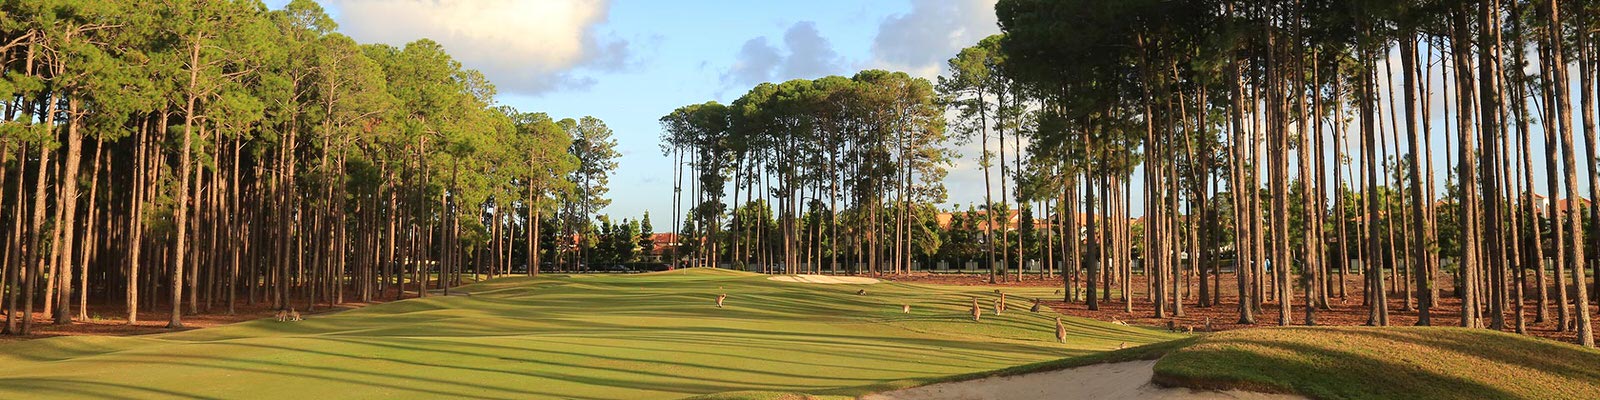 Sanctuary Cove Golf and Country Club, The Pines Course